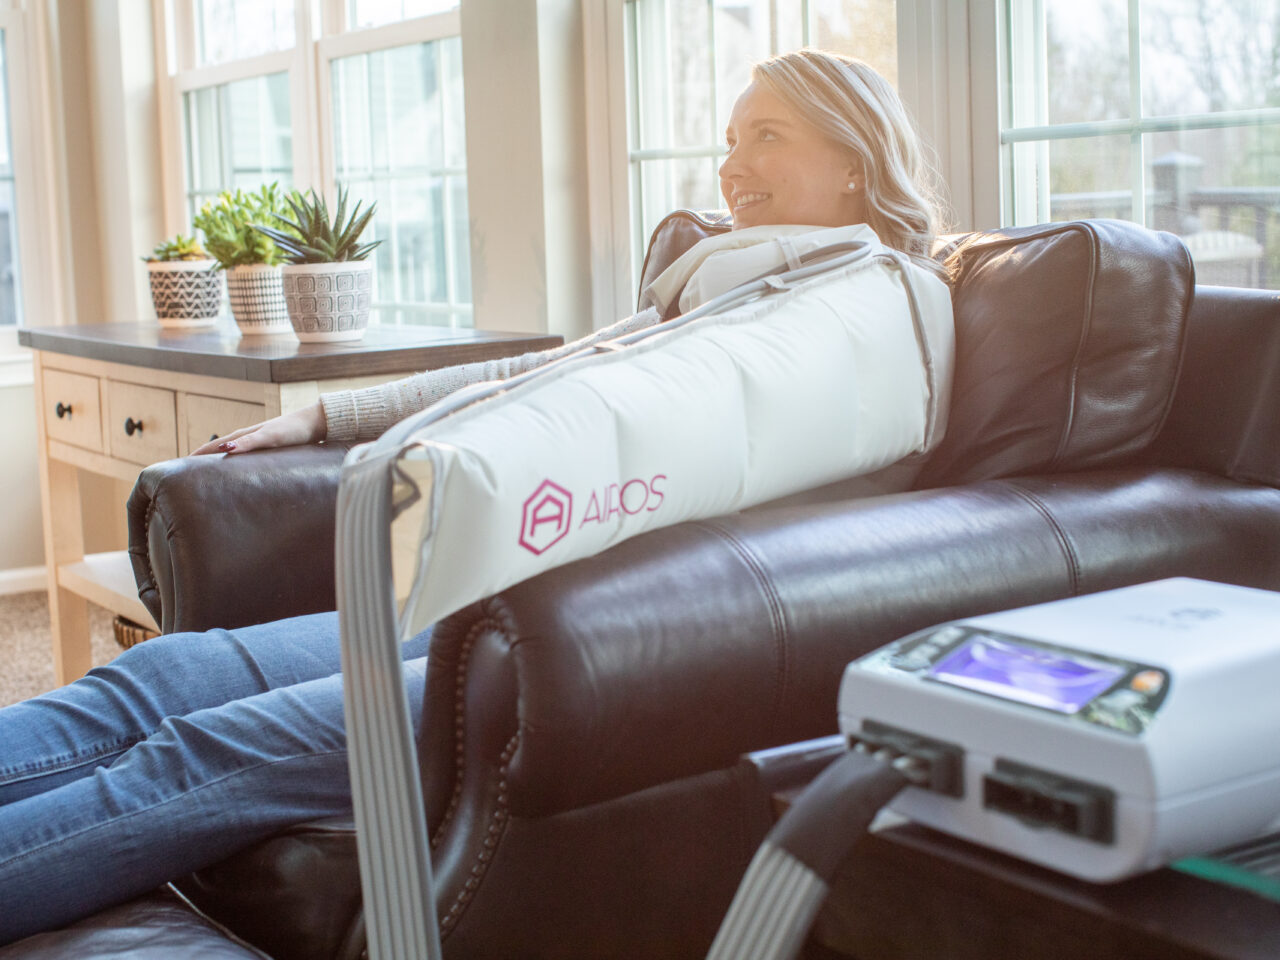 AIROS Medical Launches New Compression Therapy Device and Garment System to Treat Breast Cancer Patients